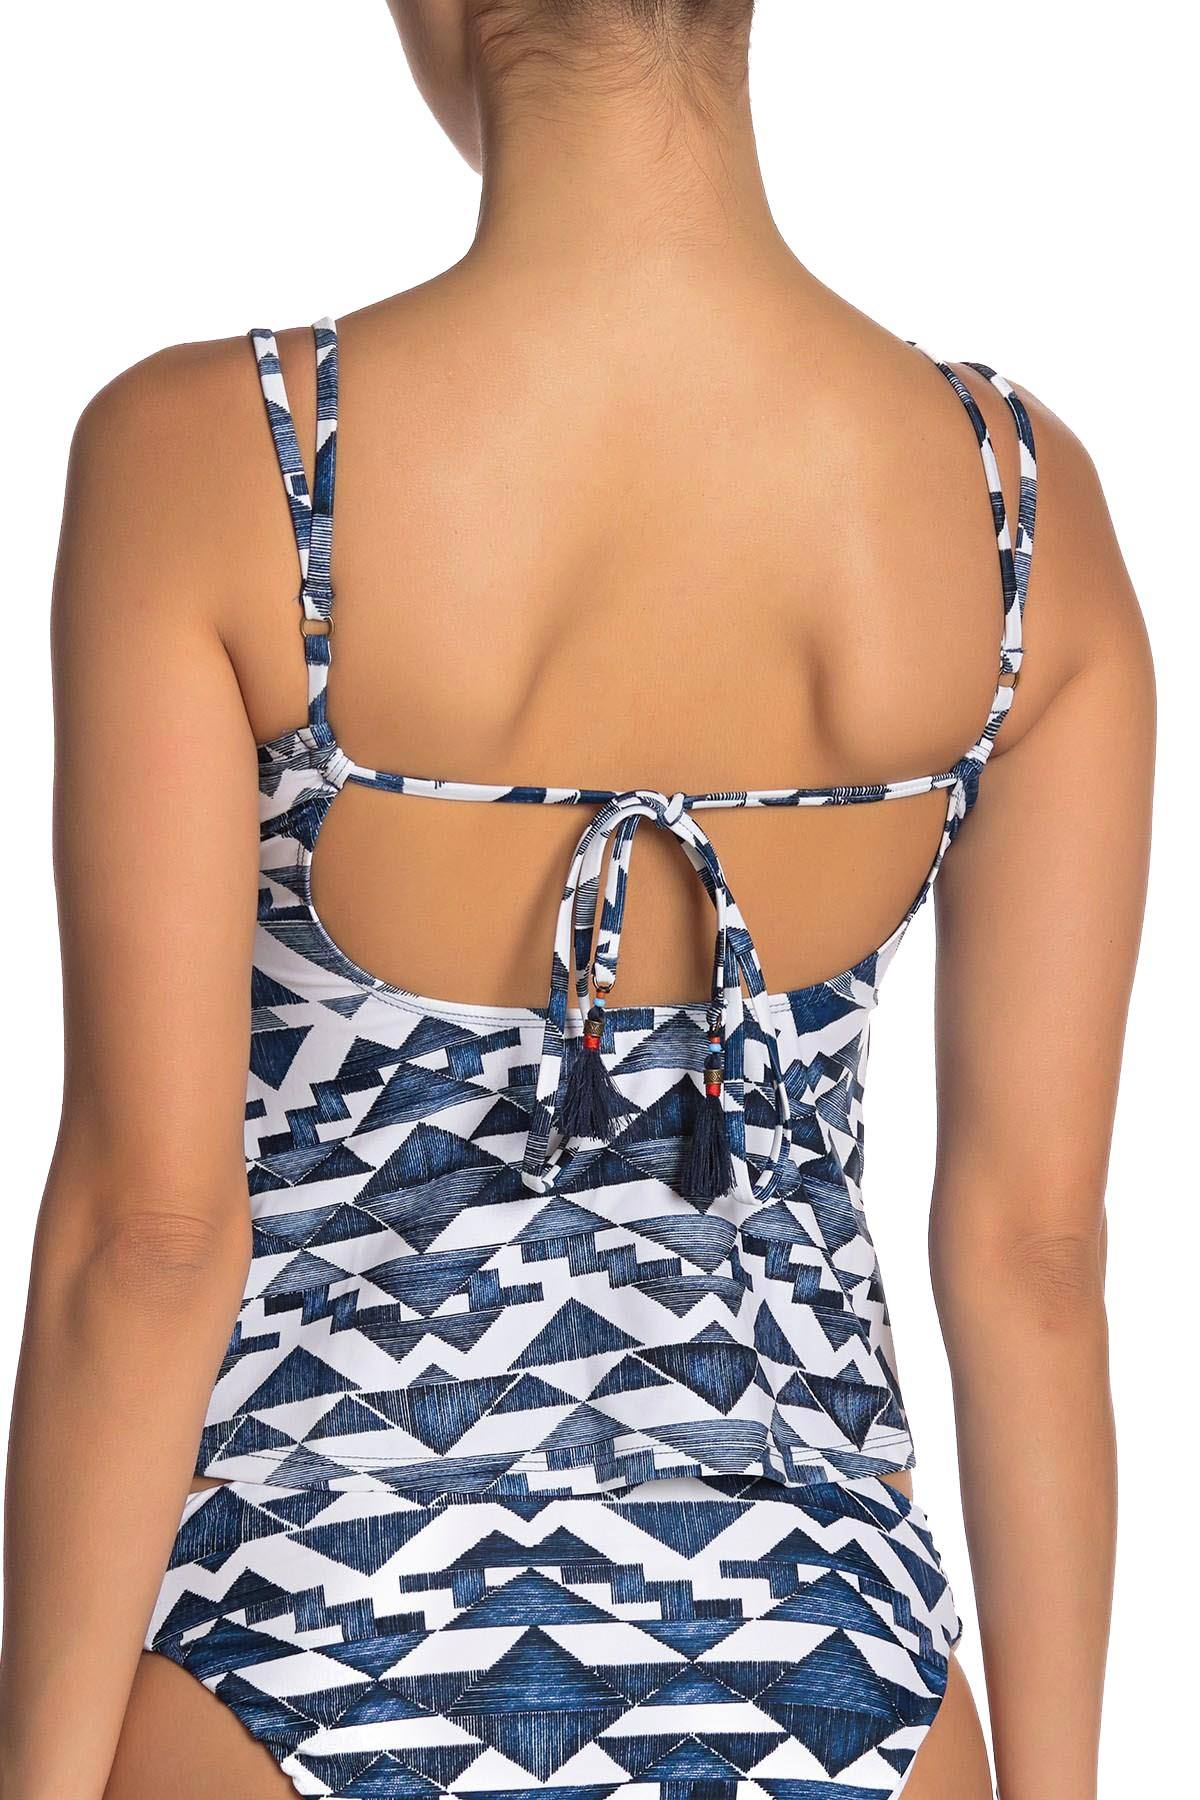 Lucky Brand Going South Embroidered Tankini Top in Indigo